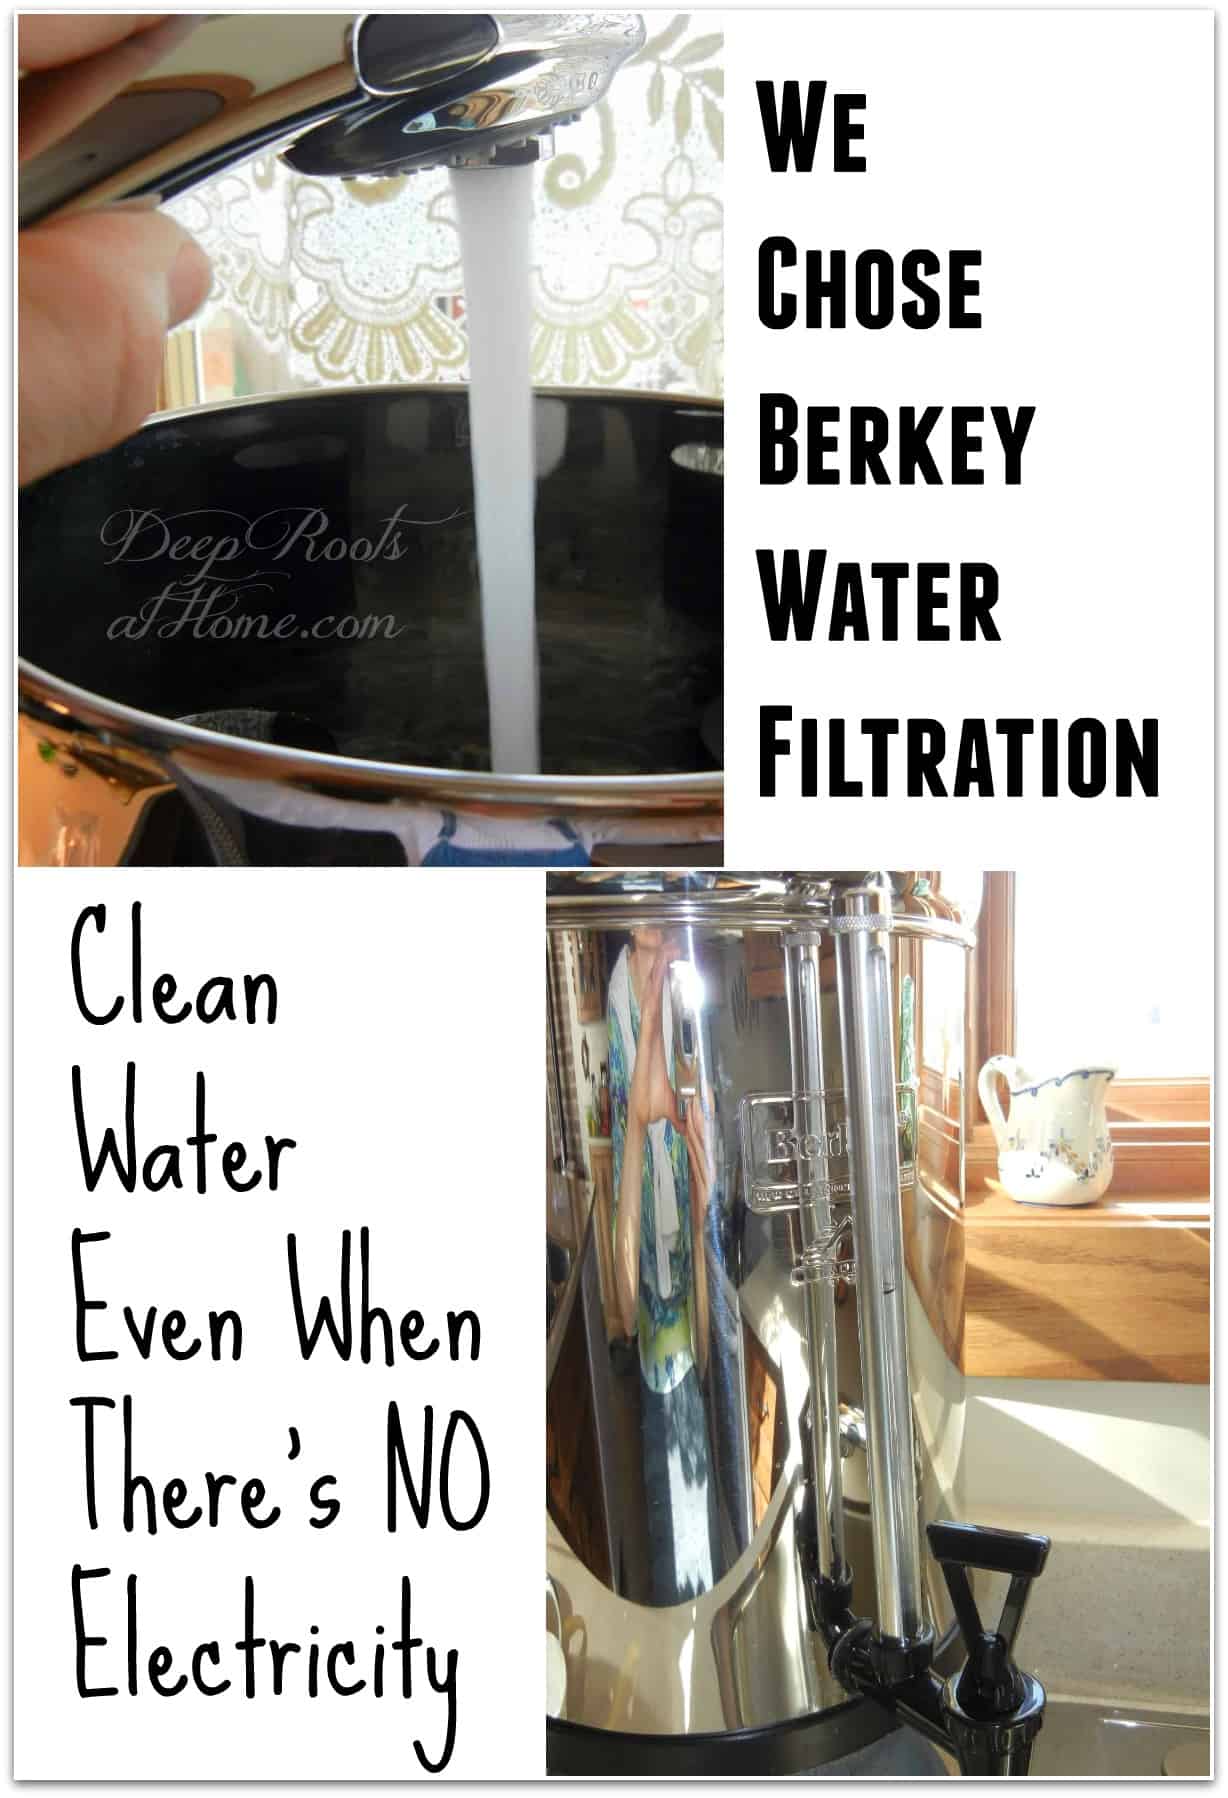 Fluoride-Free Water Even If There's NO Electricity: We Chose the Berkey. The Royal Berkey water filter. 